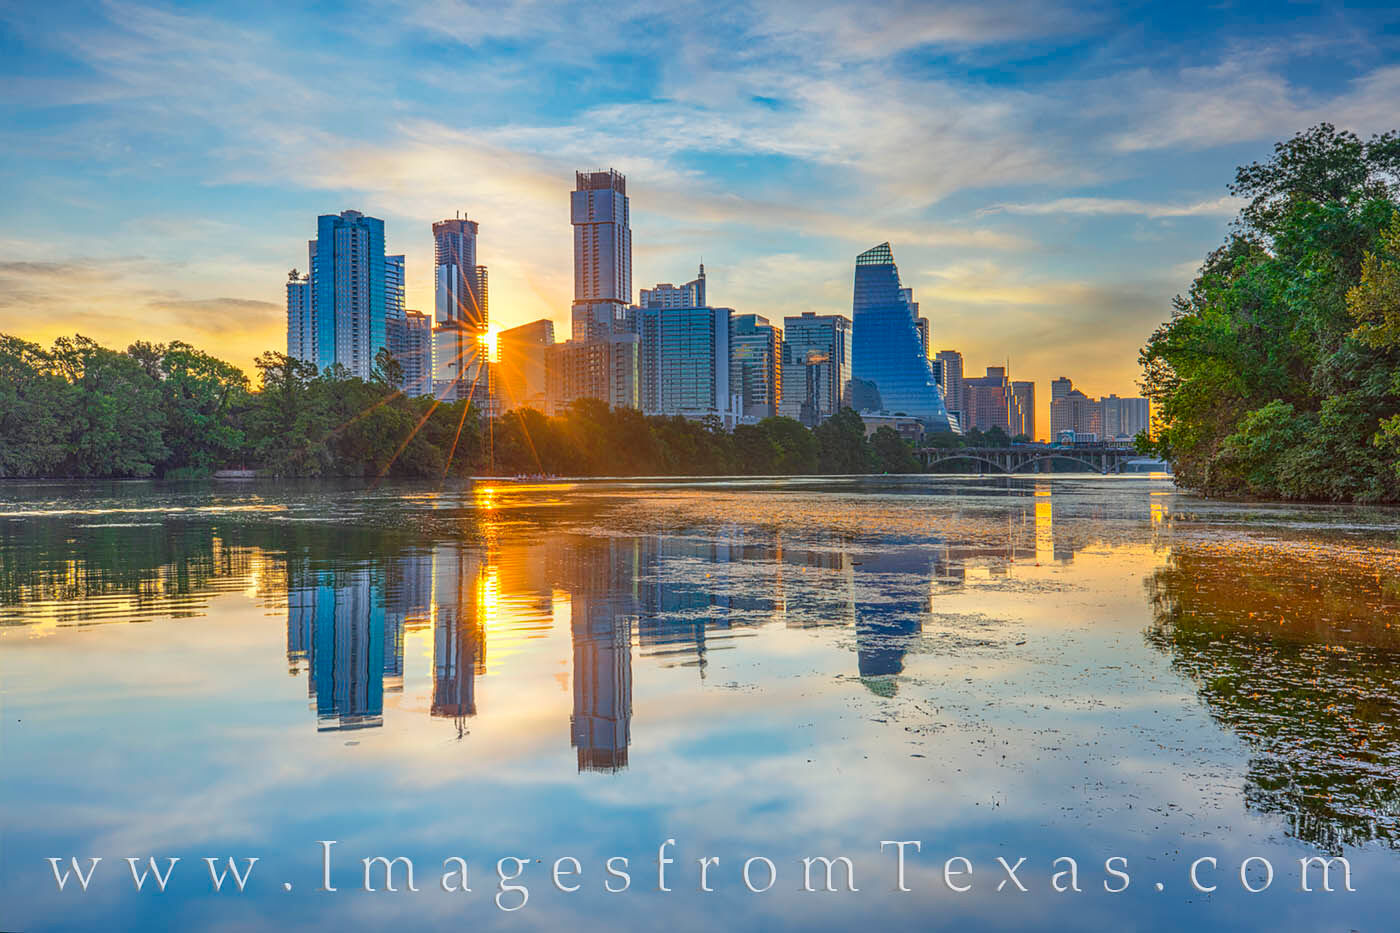 The first rays of sunshine peeked through the highrises of downtown Austin on this warm summer morning. The reflections of the...